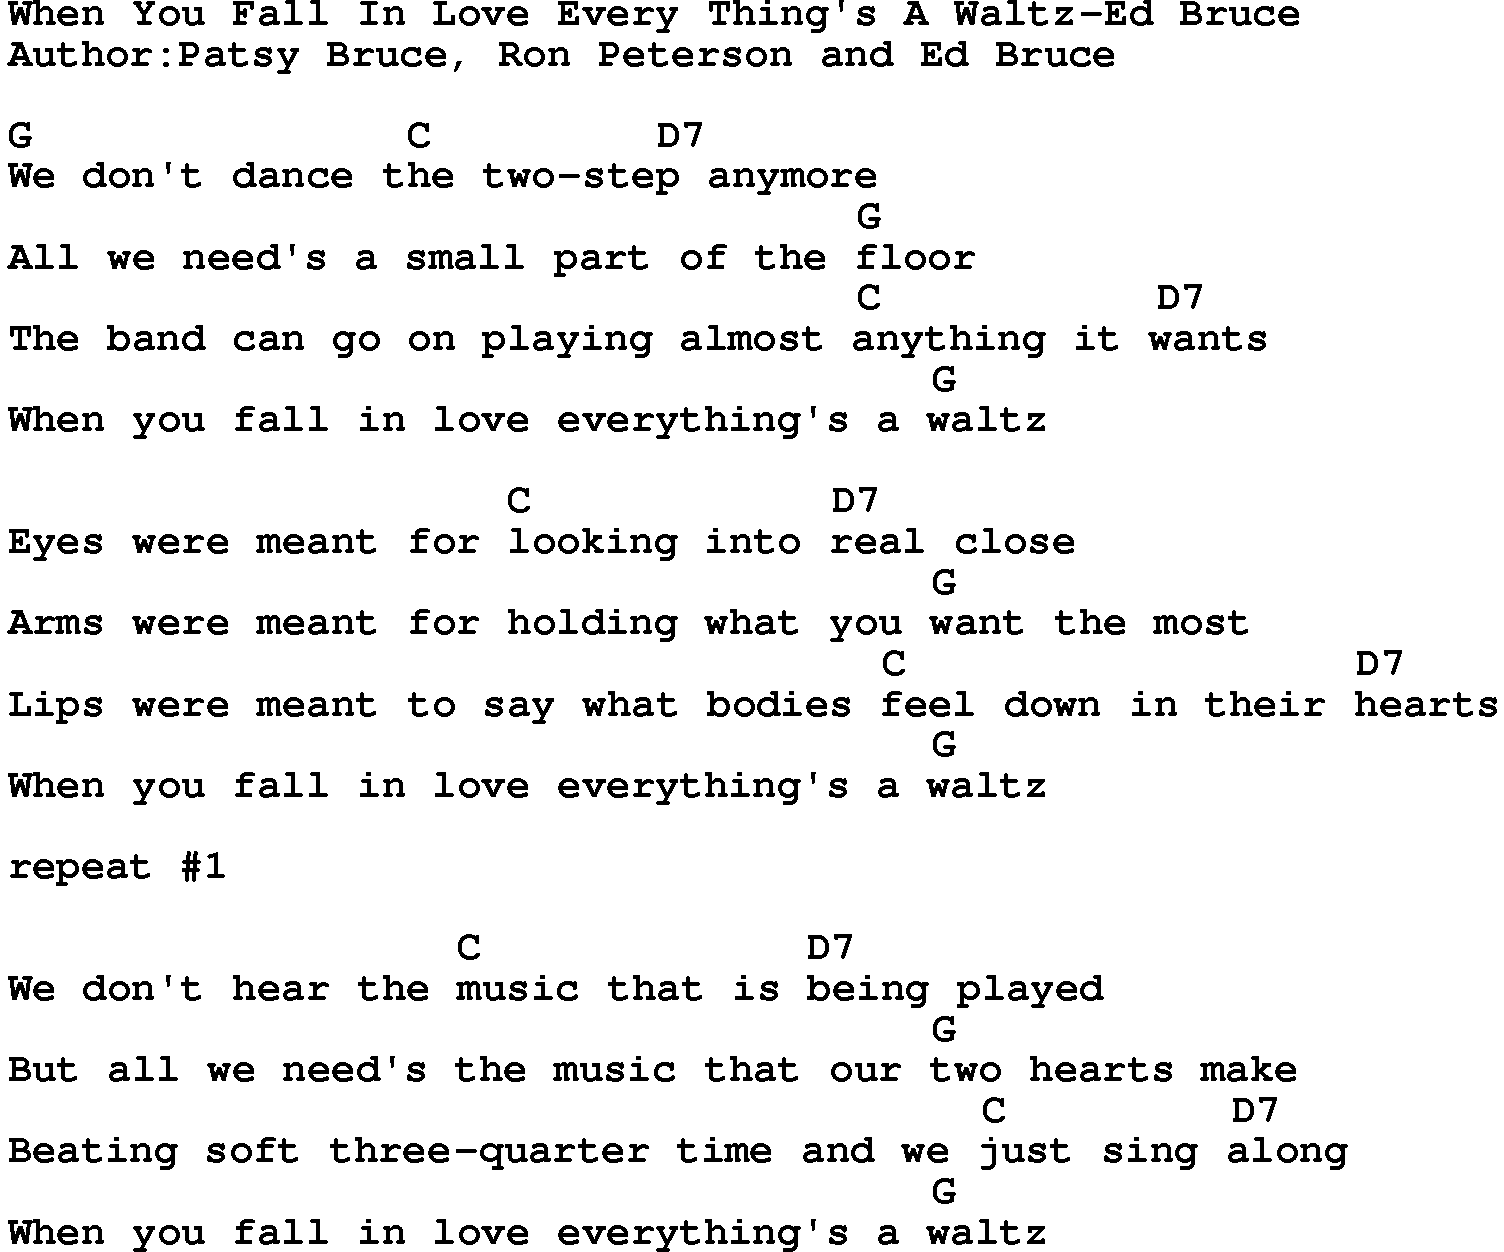 Country music song: When You Fall In Love Every Thing's A Waltz-Ed Bruce lyrics and chords